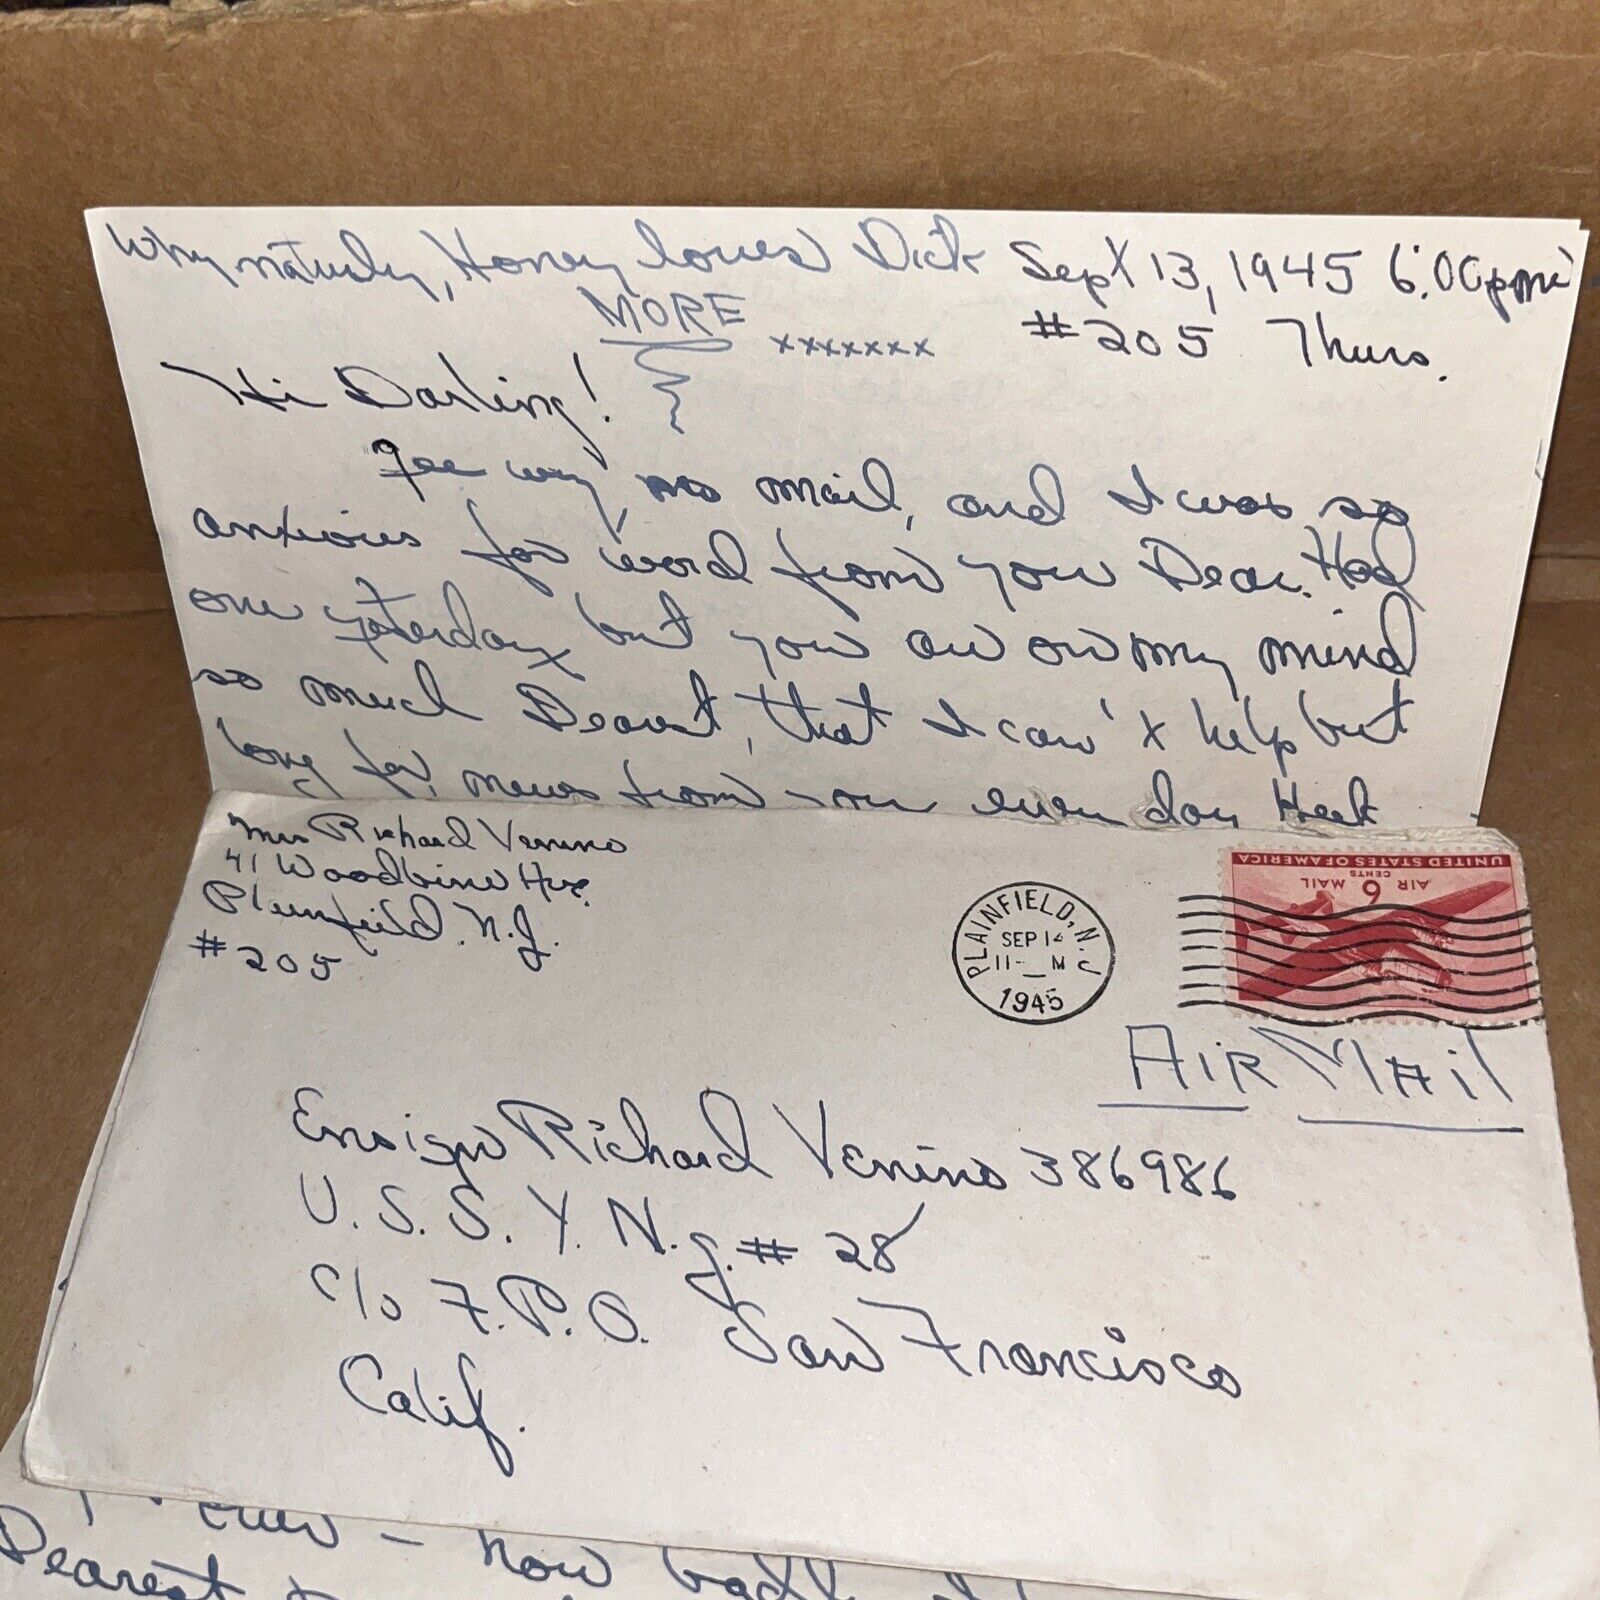 1945 Love Letter from Wife, Post WWII, to US Navy Ensign Endicott College